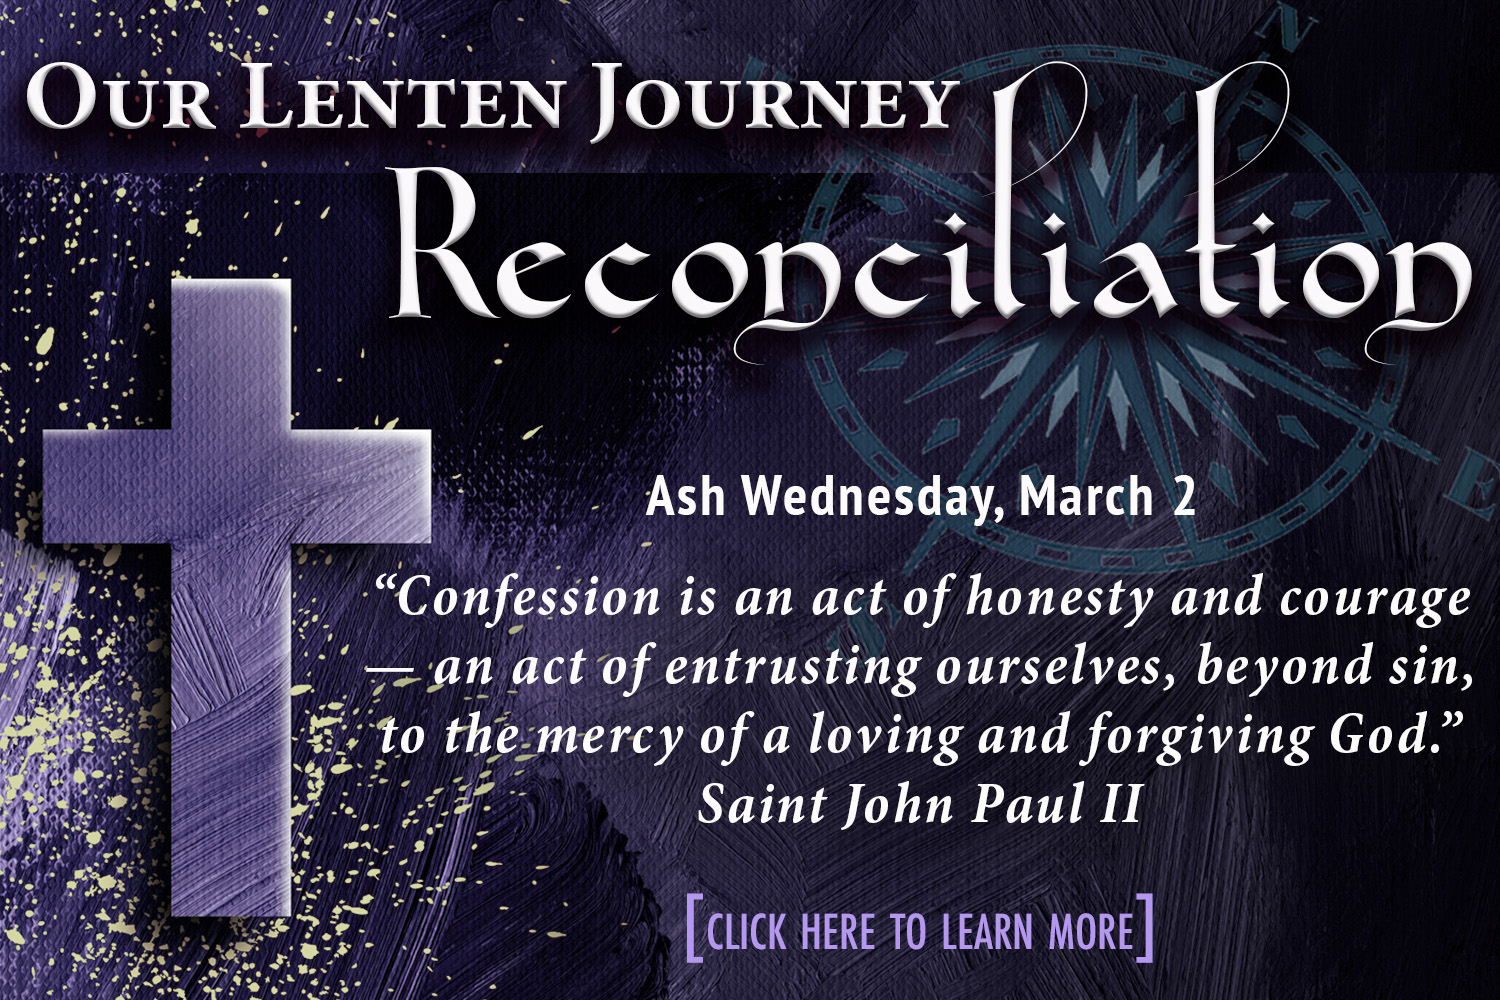 Our Lenten Journey, Ash Wednesday March 2, 2022 - The Dialog